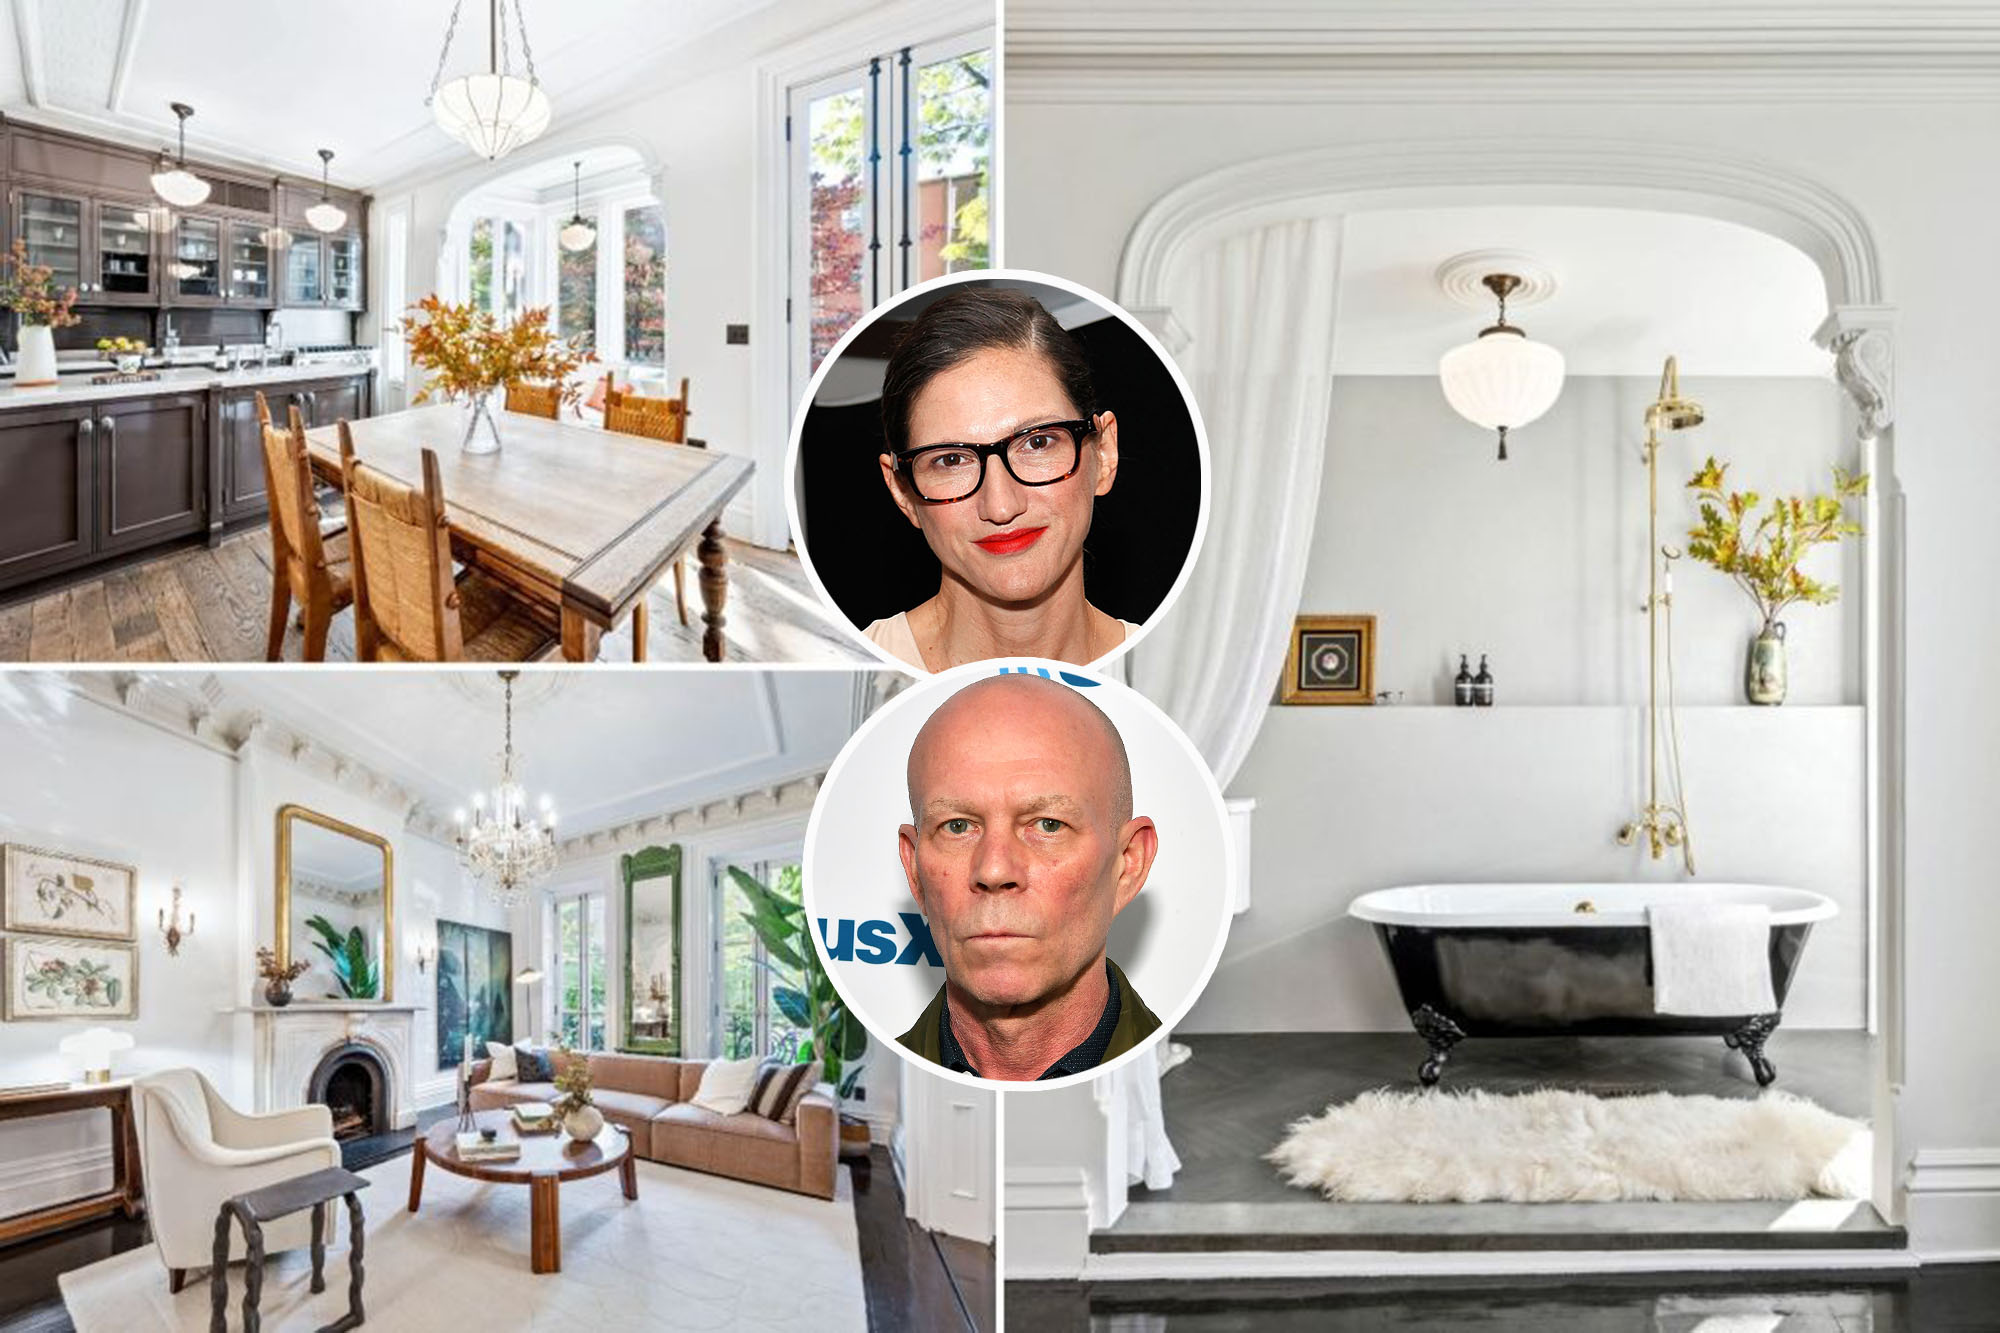 Jenna Lyons sold this Brooklyn townhouse to Depeche Mode's Vince Clarke and now it trades again for $6M